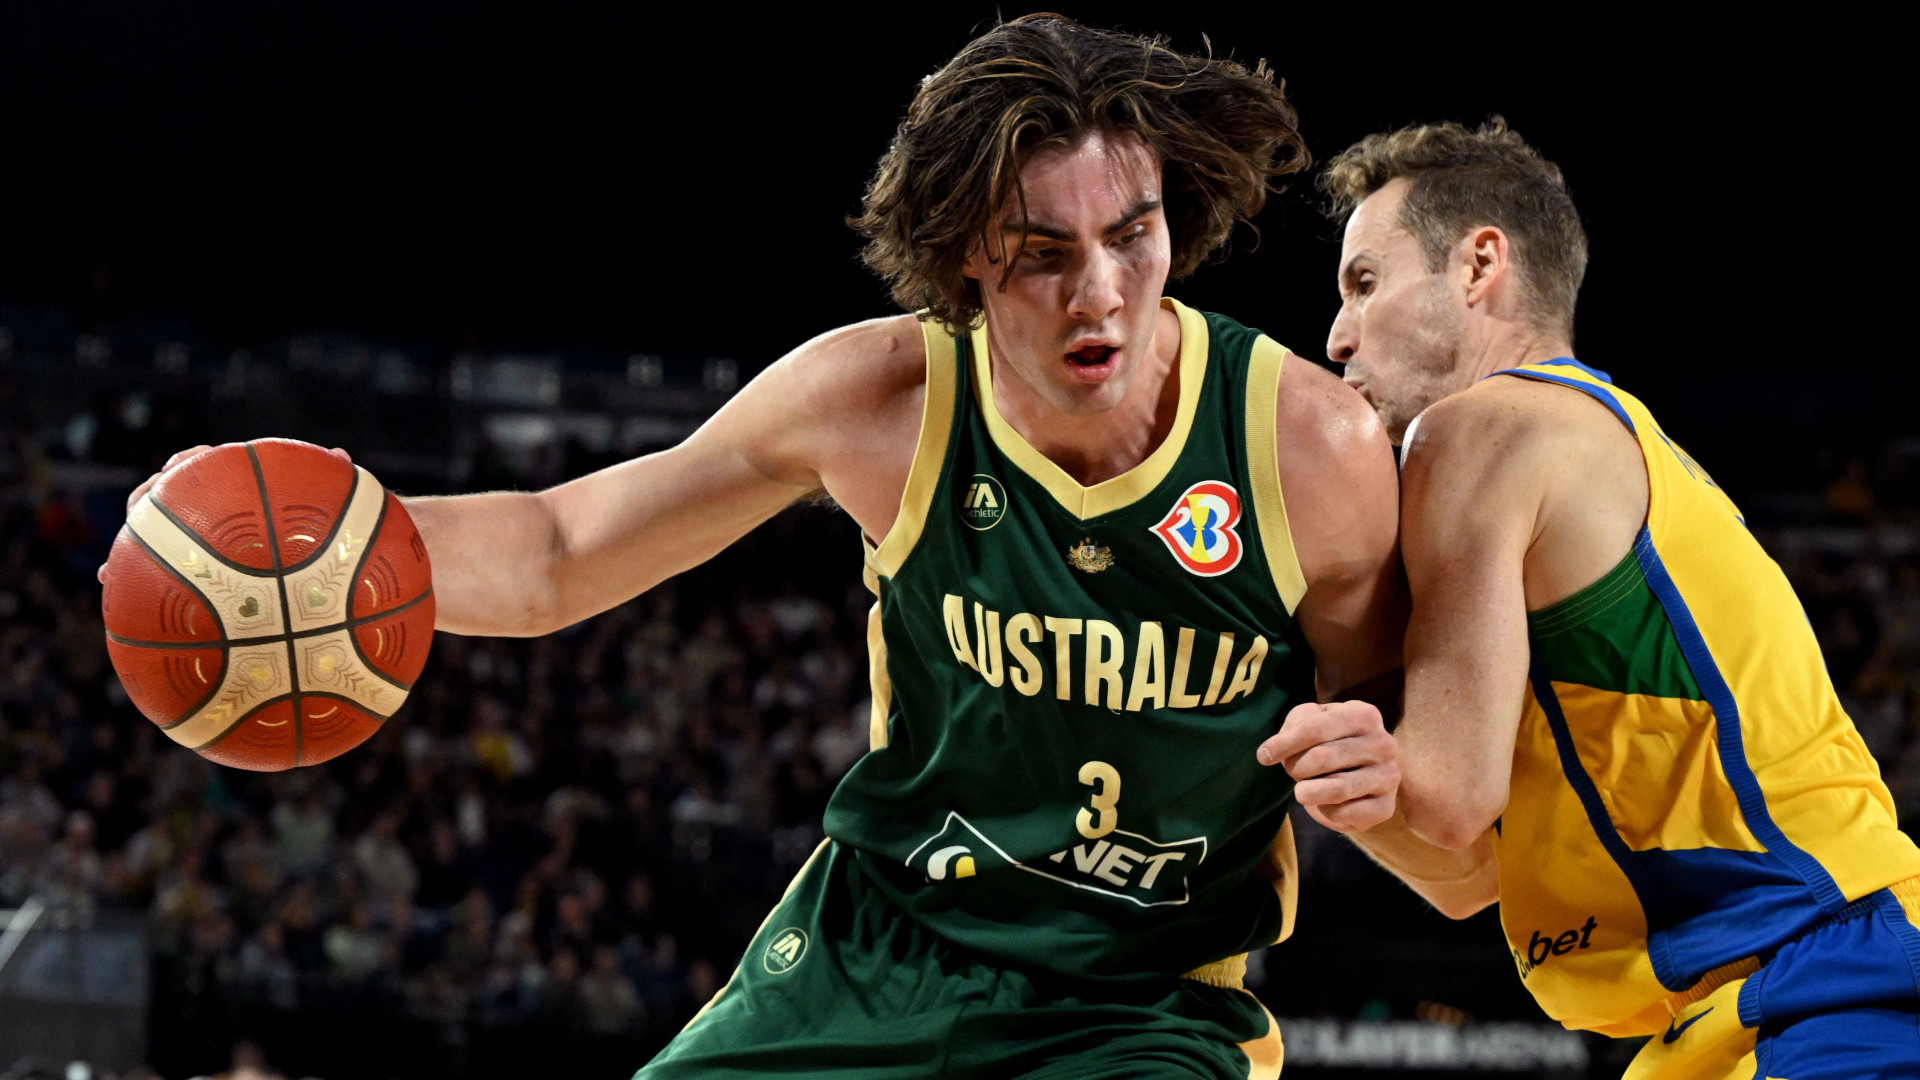 How to watch Boomers vs The World: Date, time, channel for